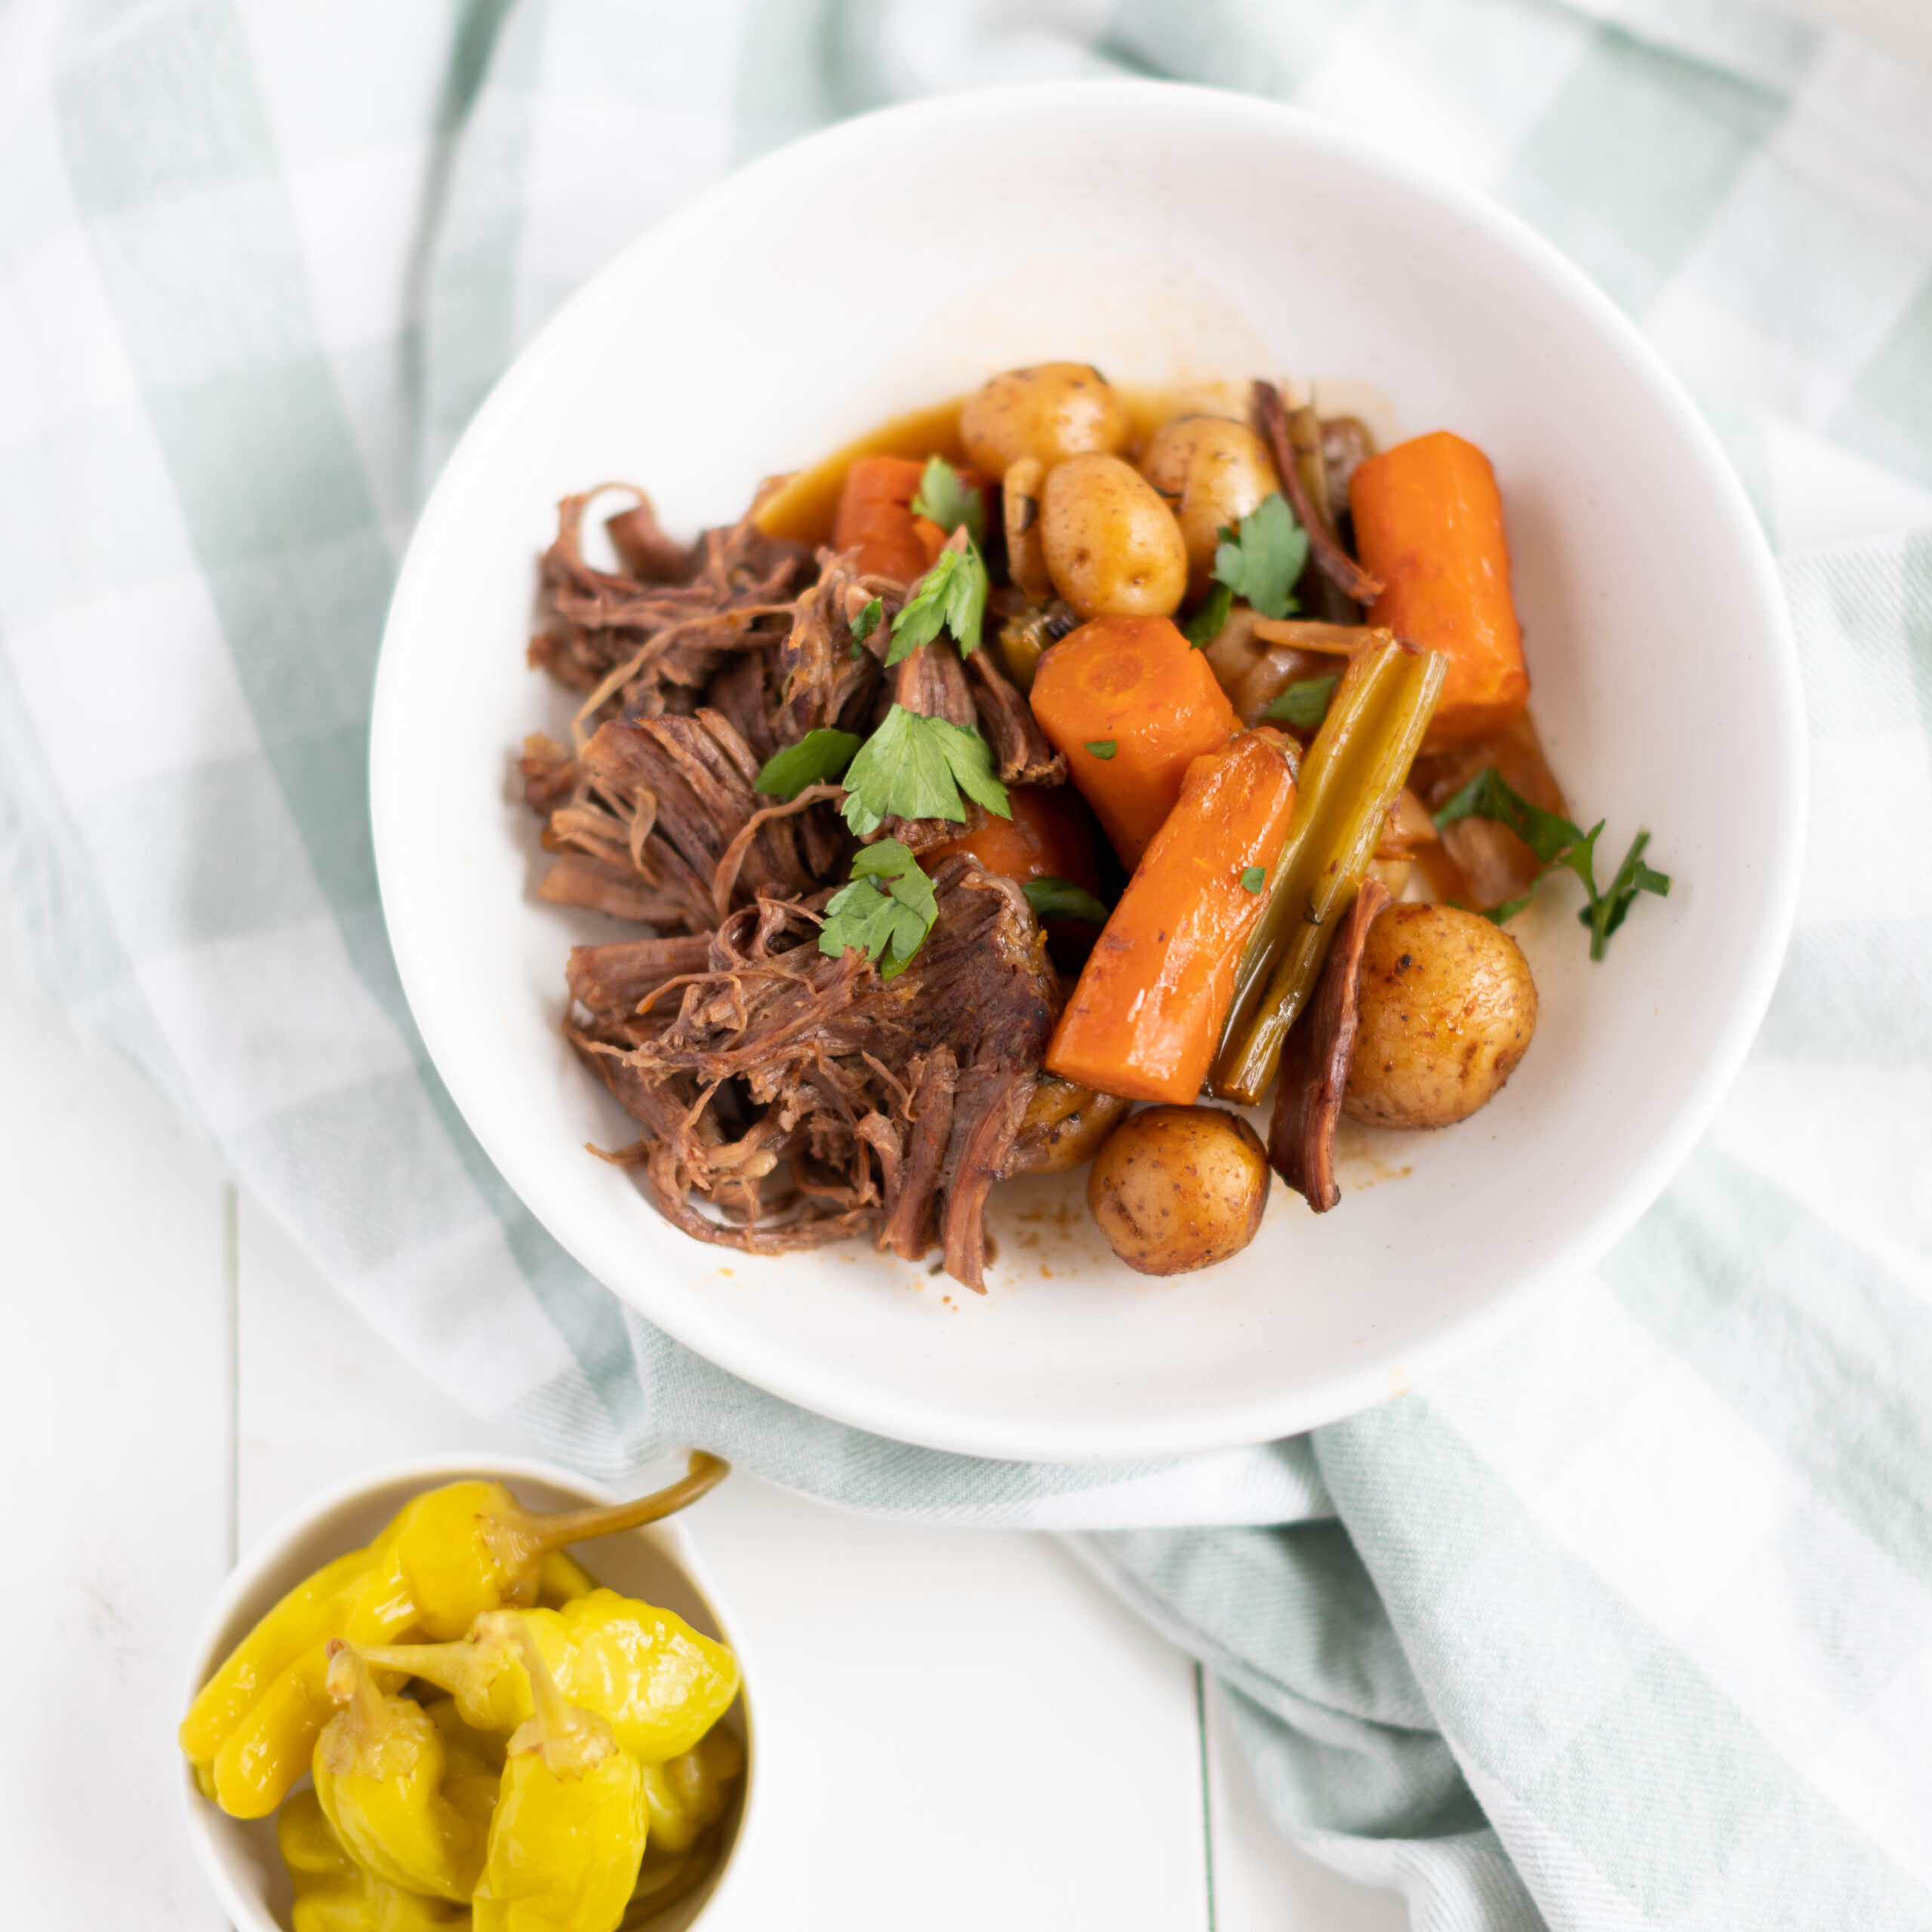 PERFECT CROCKPOT POT ROAST • Loaves and Dishes